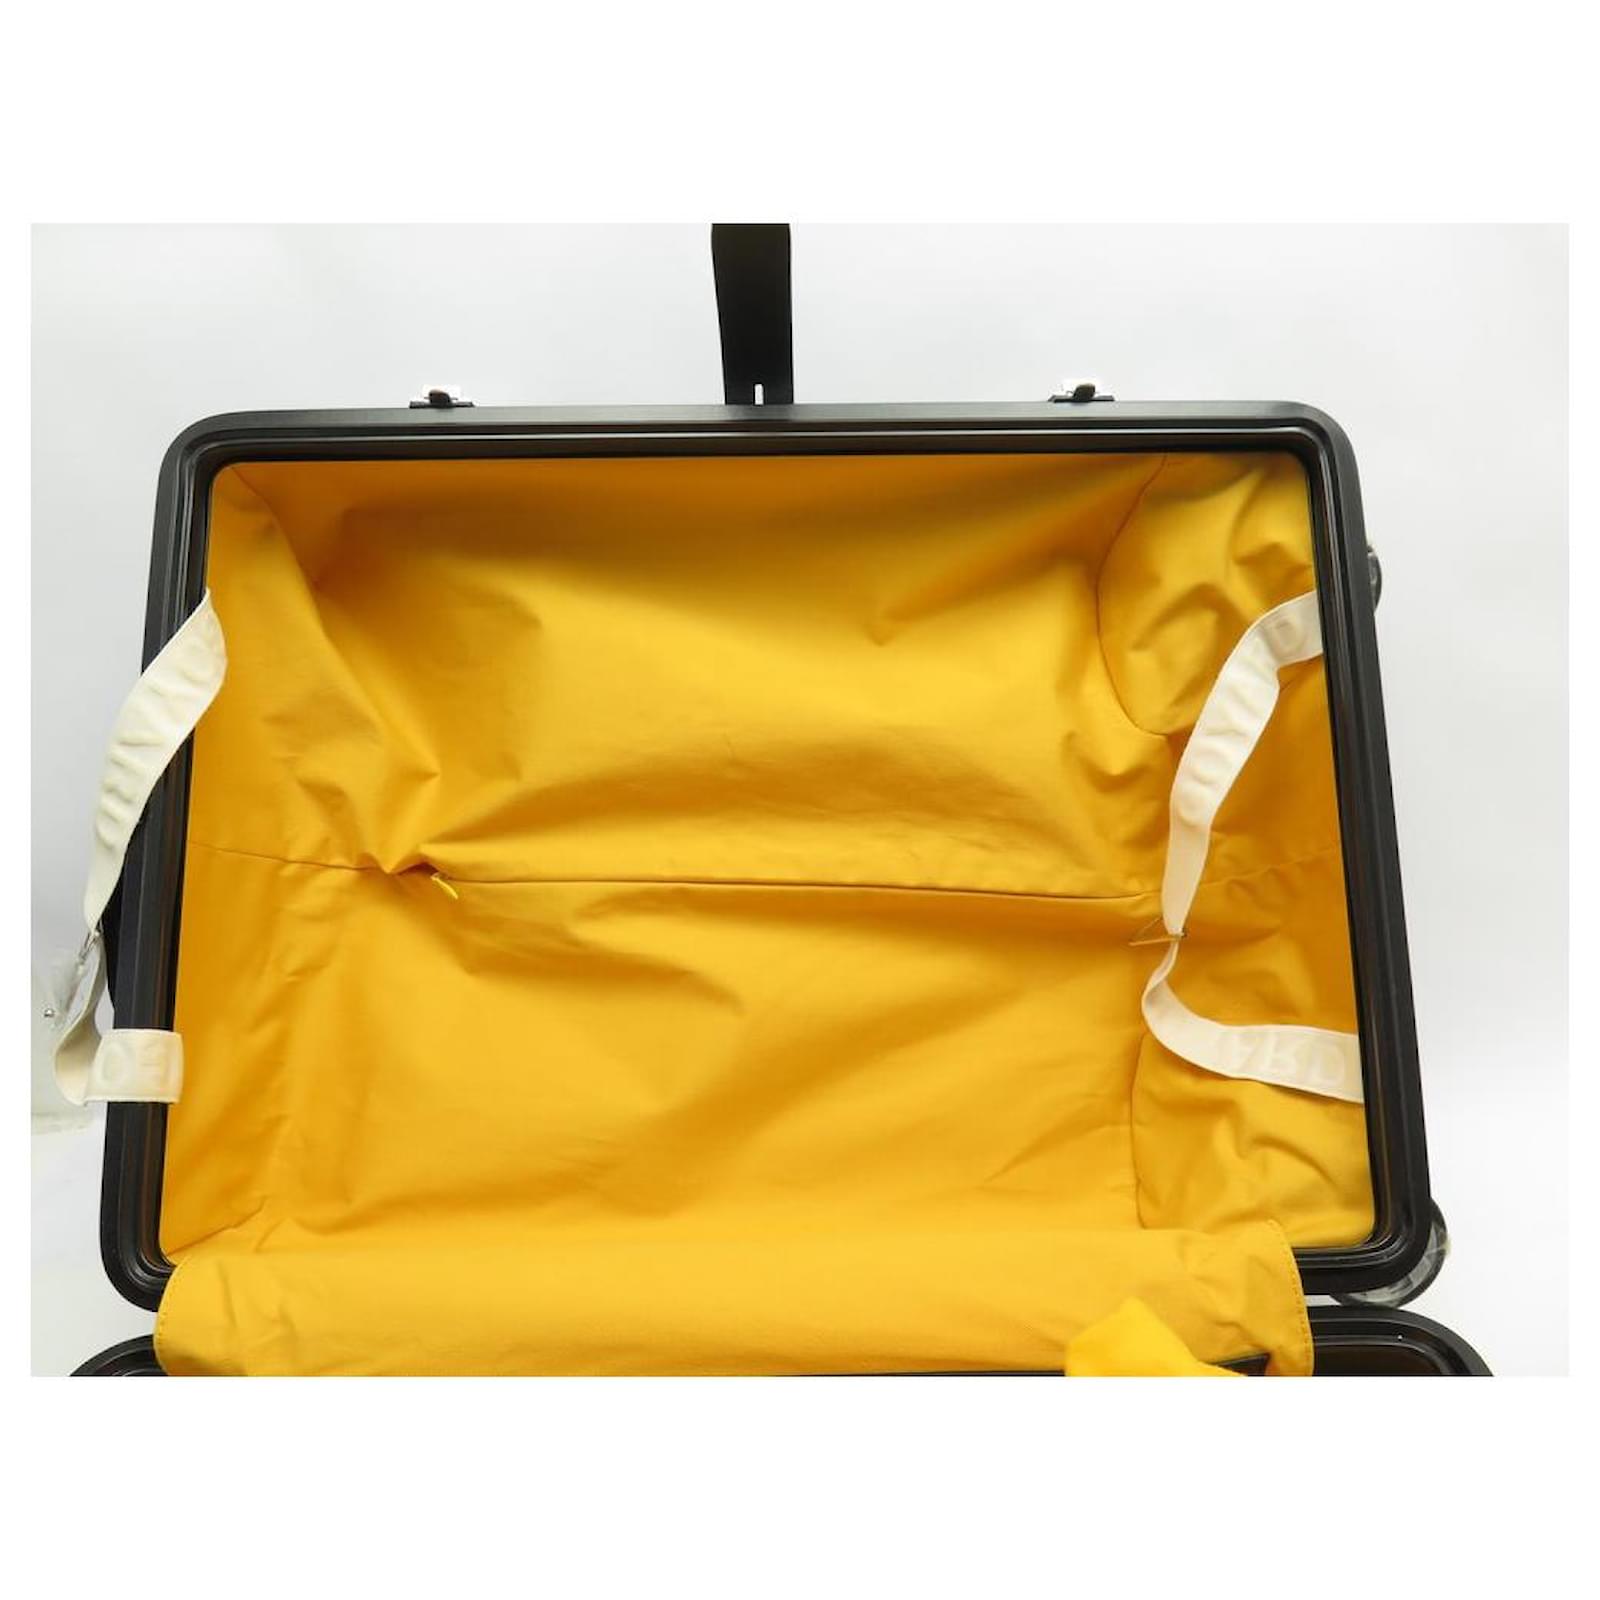 Bourget PM Trolley Case – Markat store